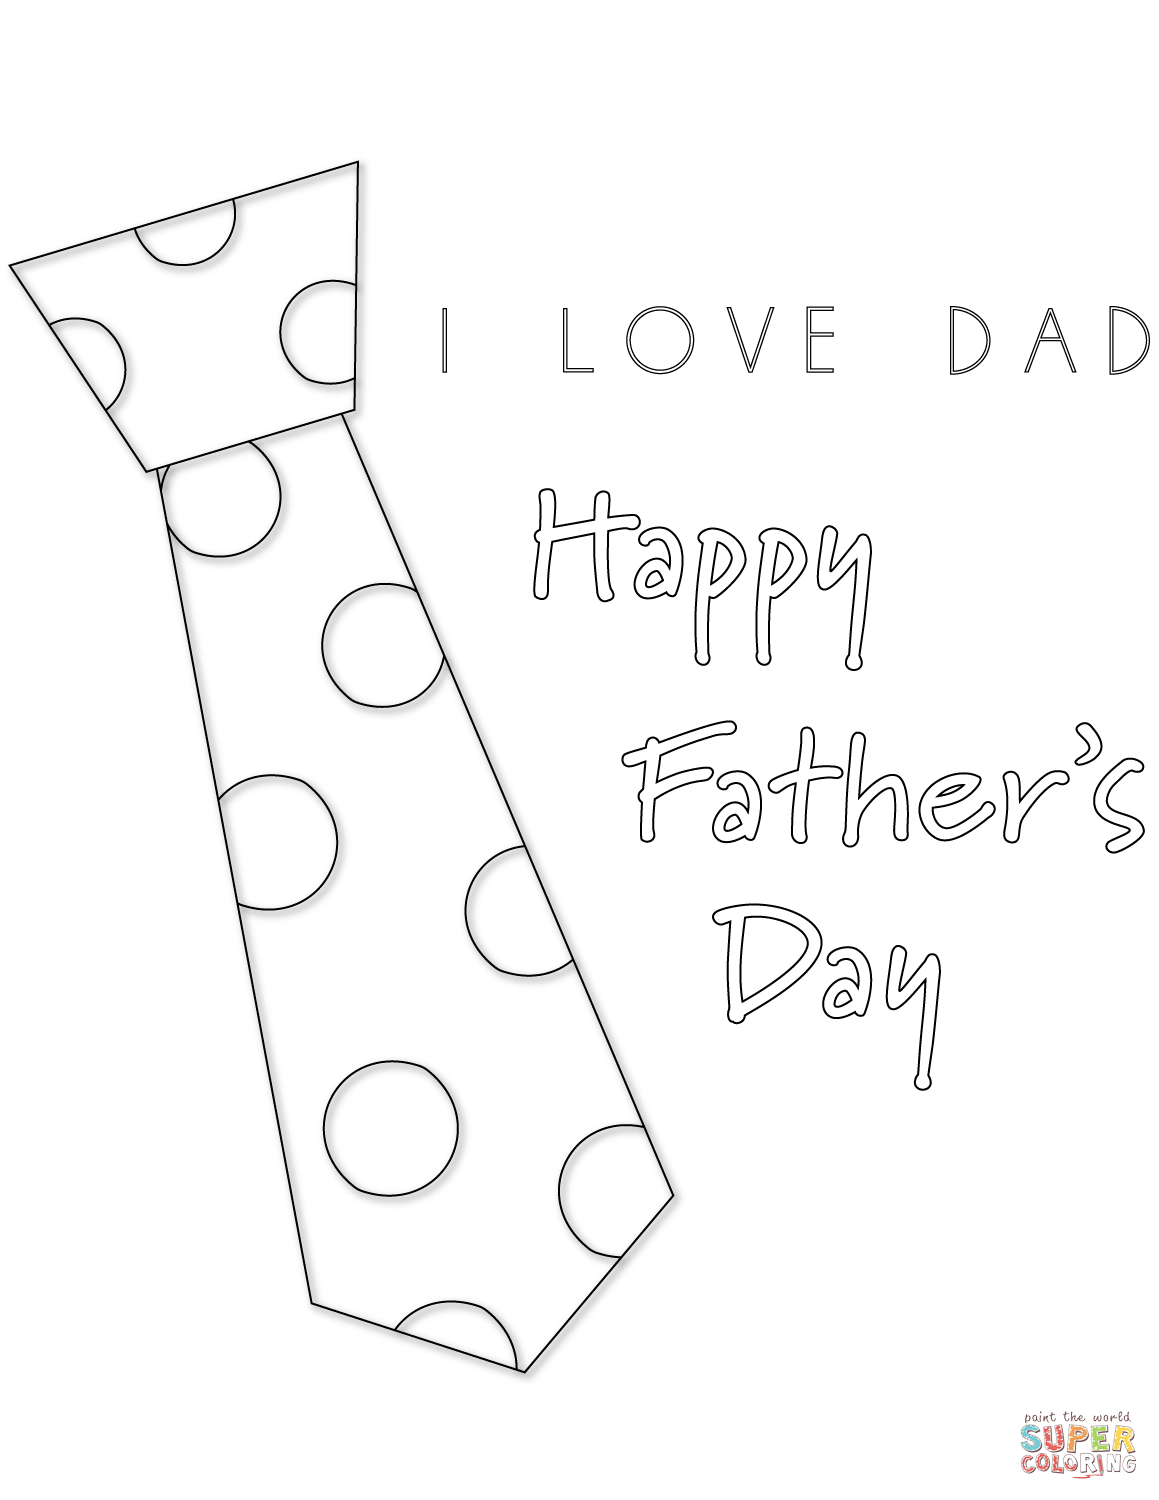 I love dad coloring page free printable coloring pages